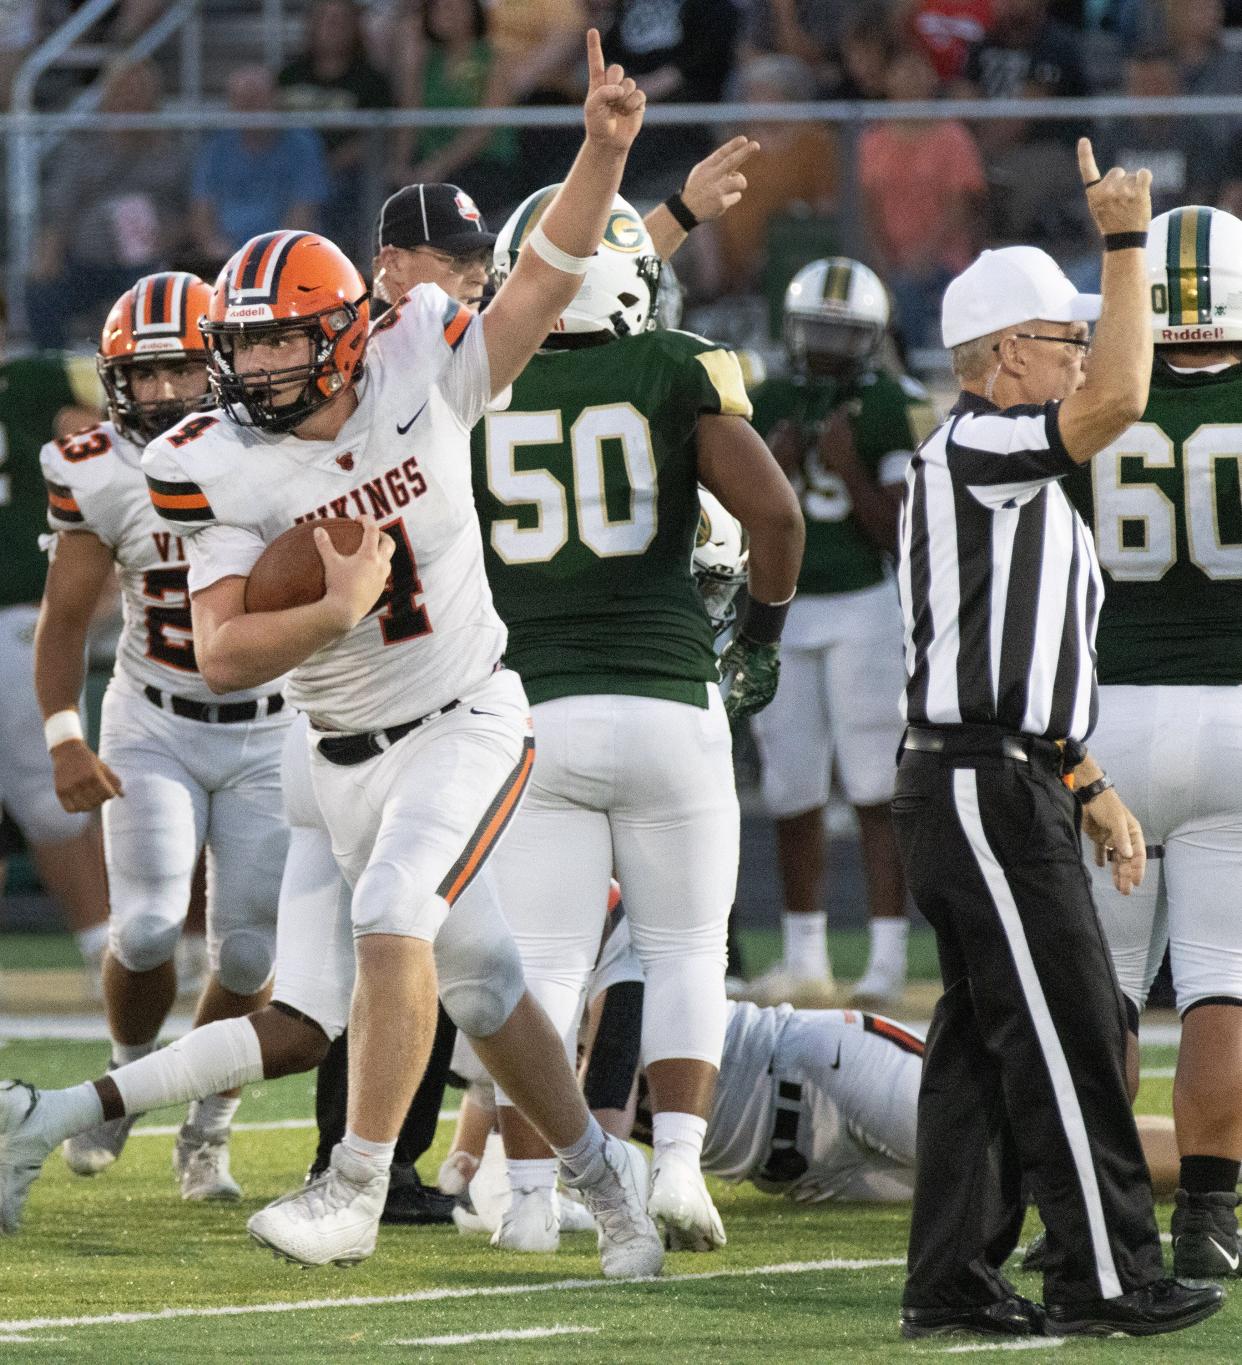 Hoover’s Drew Logan recovers a GlenOak fumble on Friday, Sept. 17, 2021.